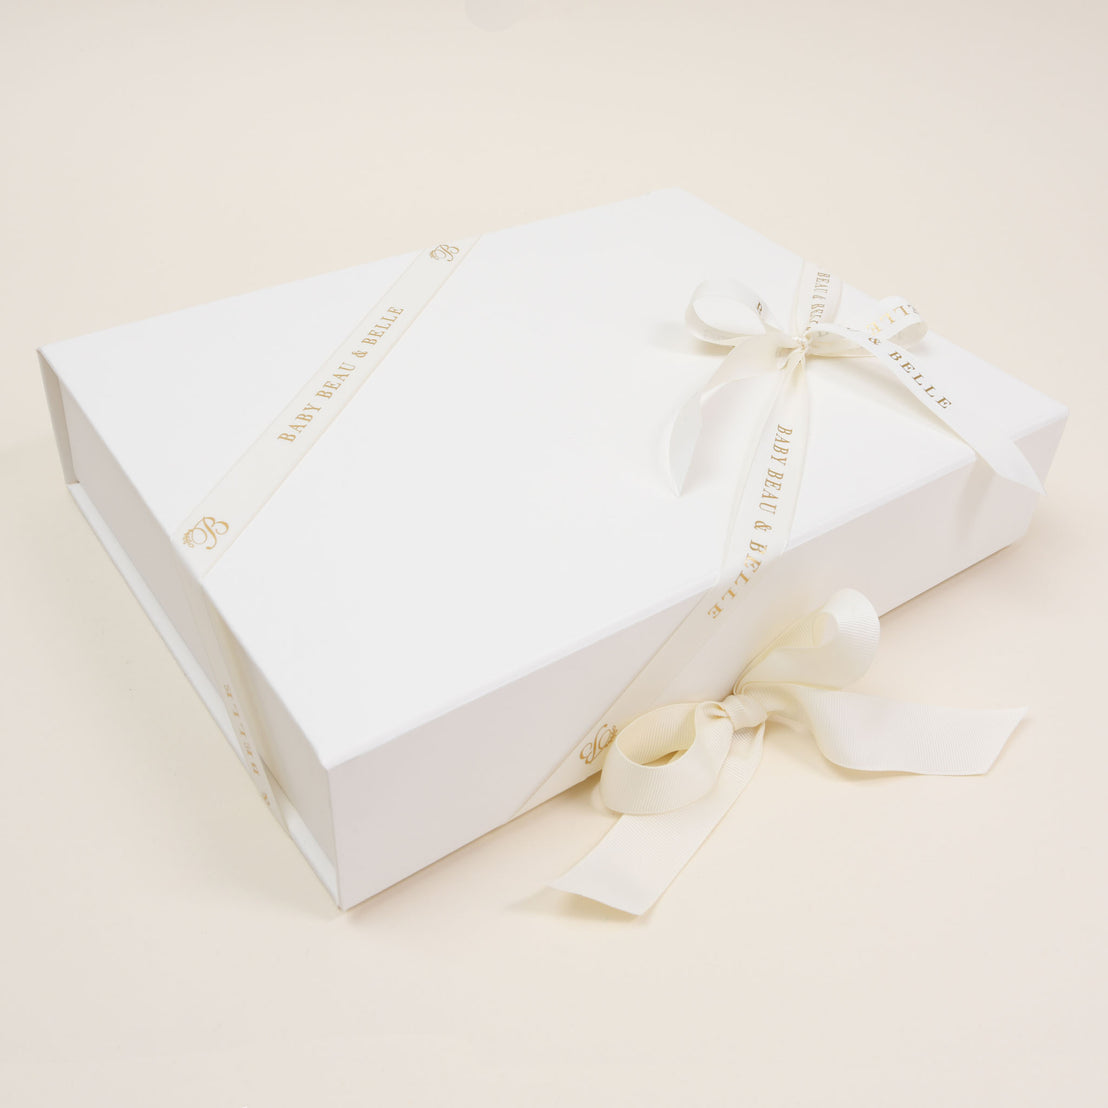 An elegant Baby Beau & Belle white gift box with a magnetic closure, tied with a delicate ivory ribbon, showcasing a sophisticated and minimalist design on a soft beige background.